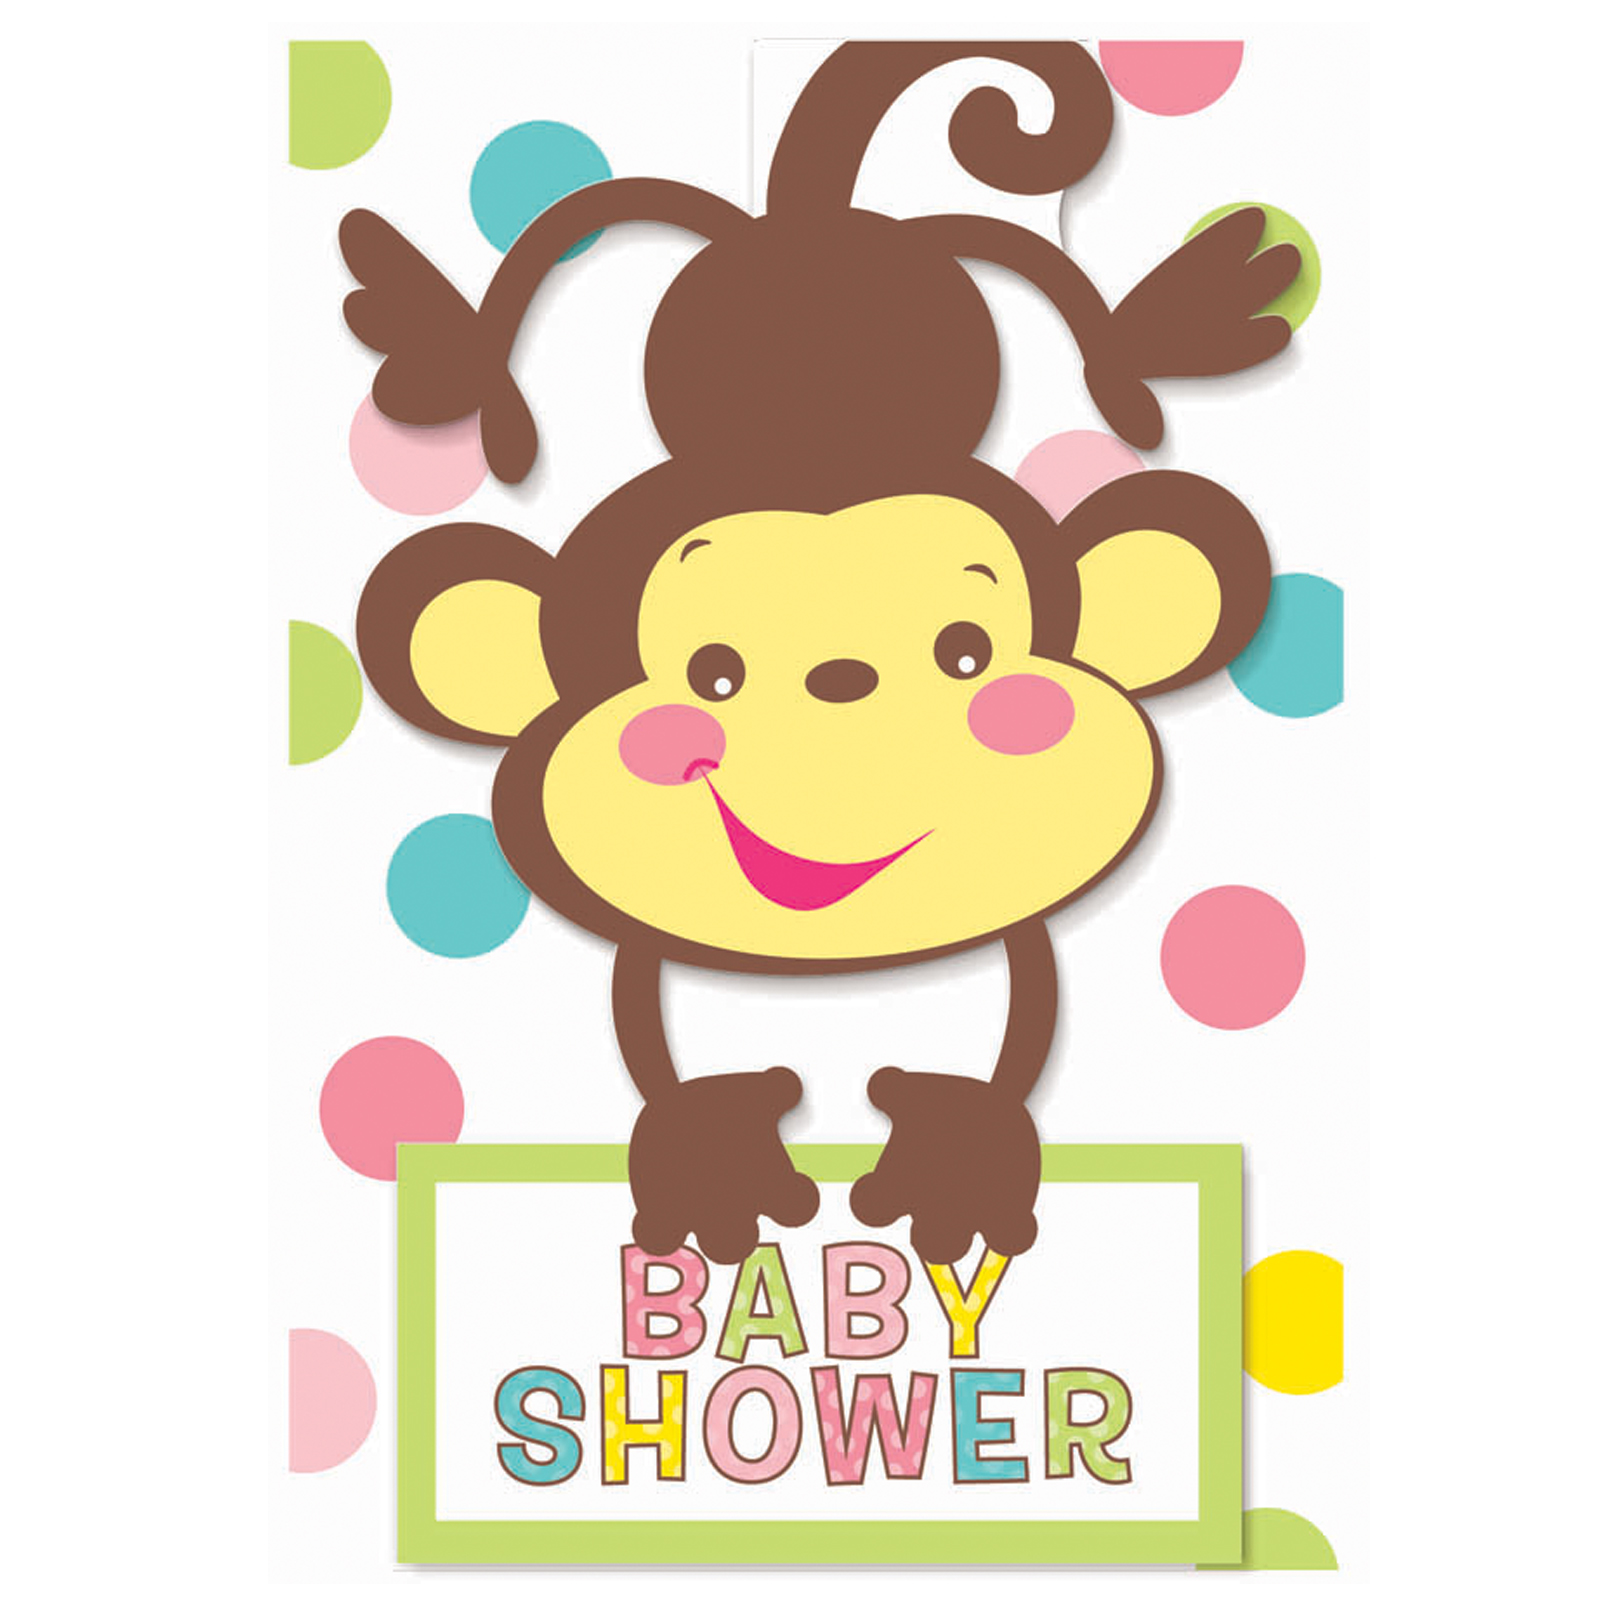 clip-art-of-monkey-baby-shower-free-image-download